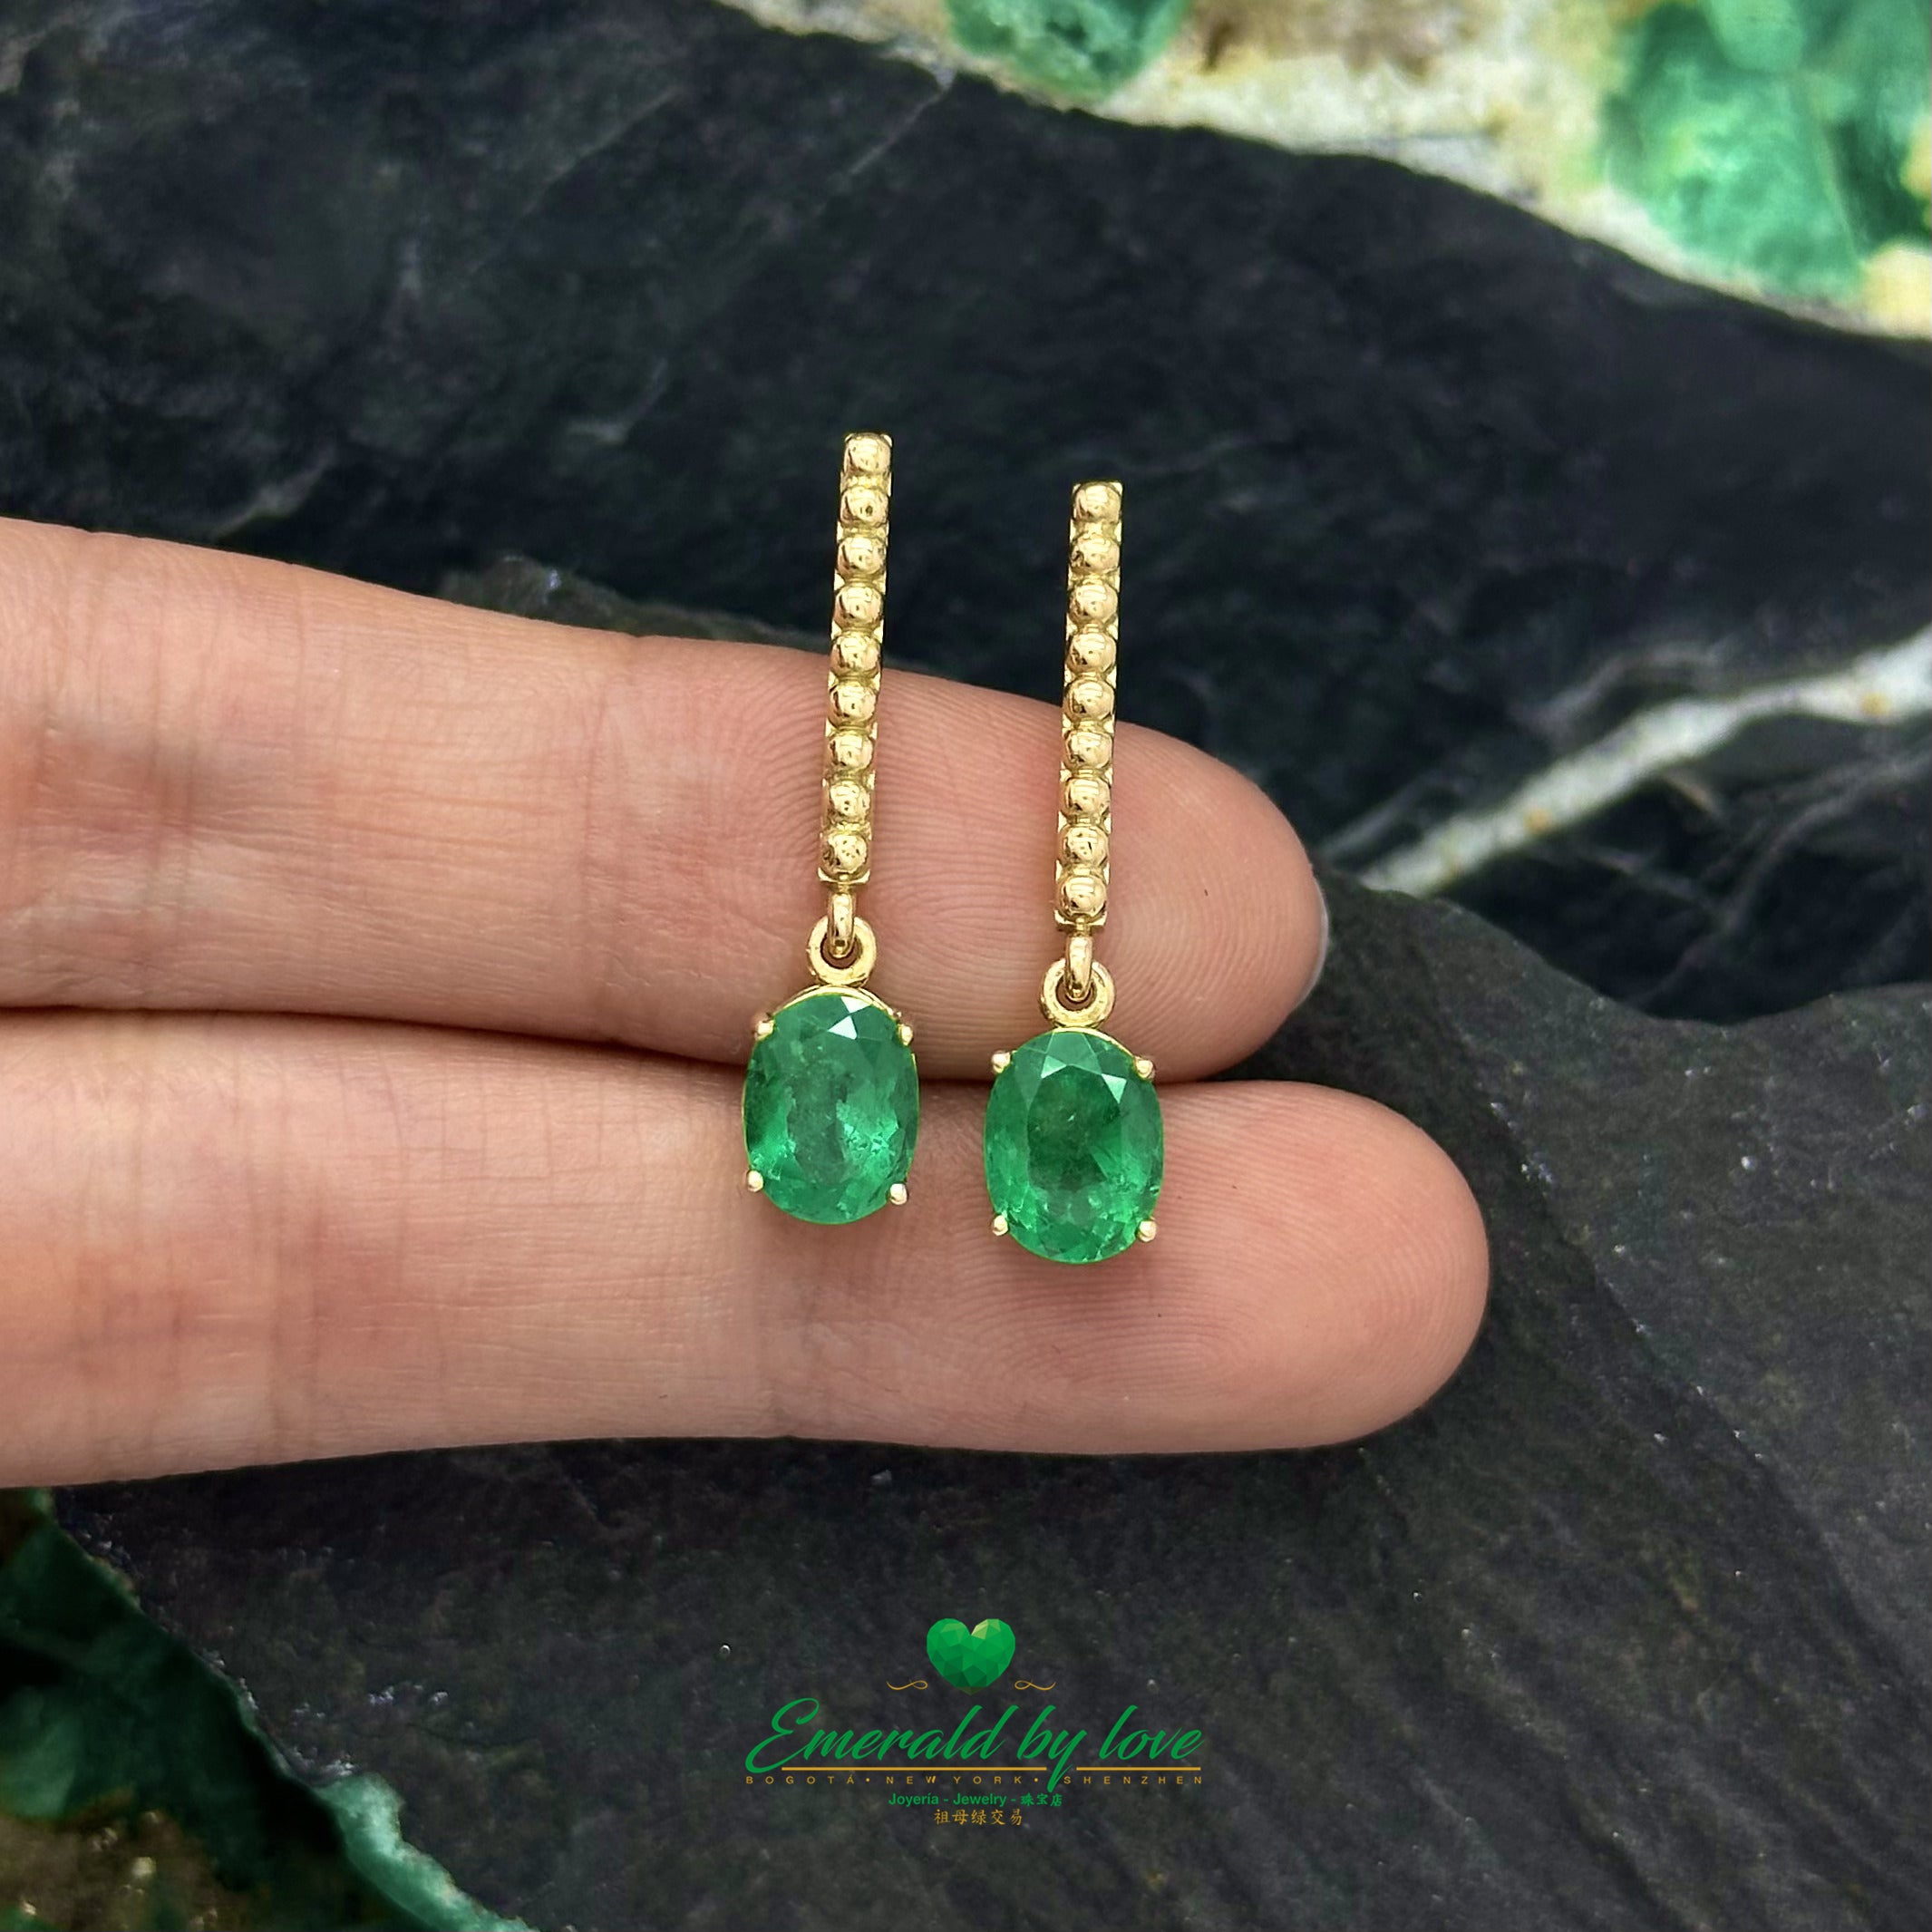 Golden Elegance: Oval Emerald Long Earrings with Round Textured Design